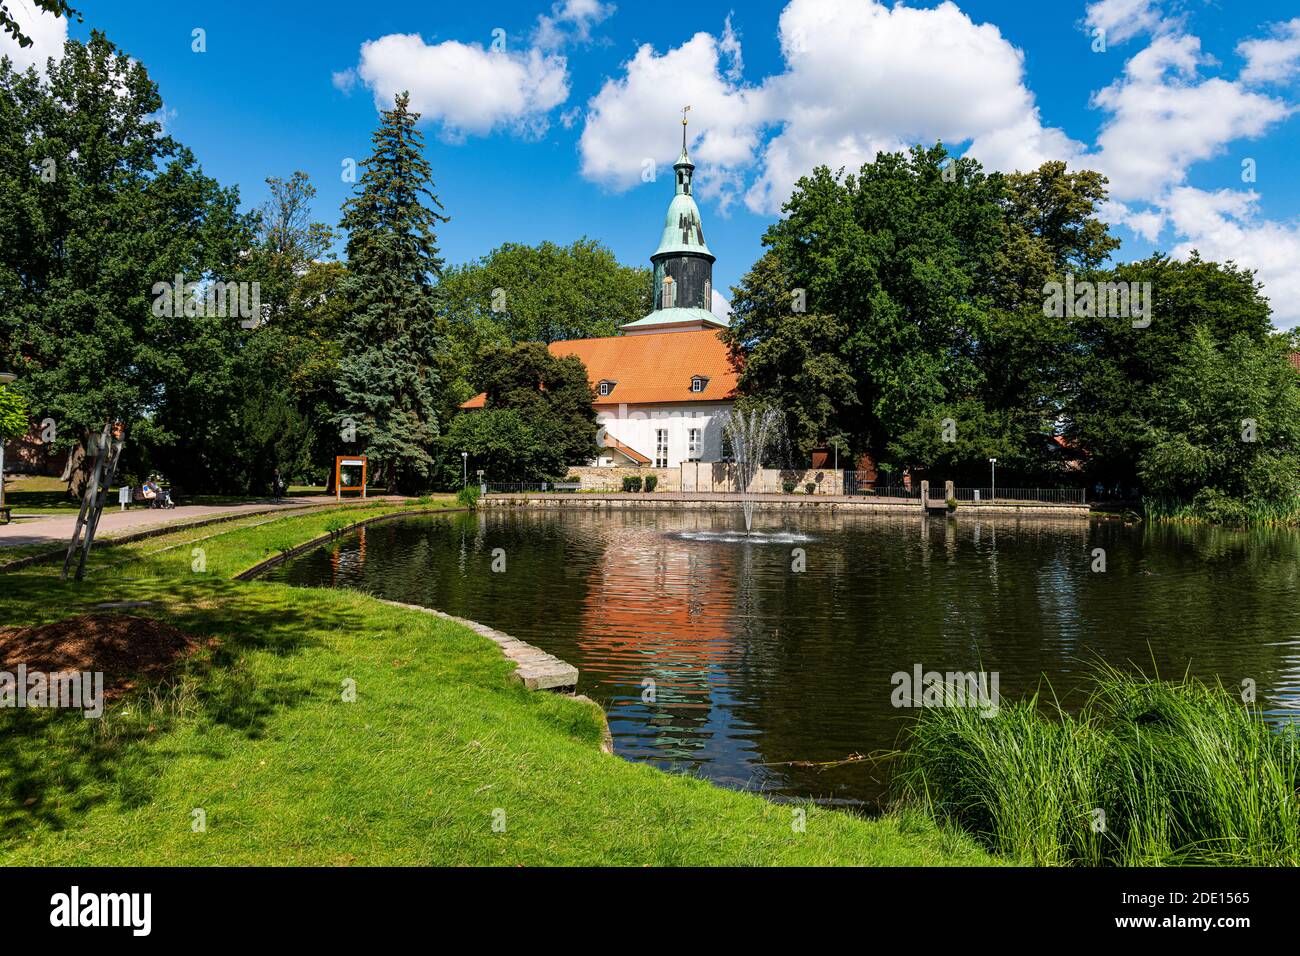 Pond in front of the Michaelis Church in Fallersleben, Wolfsburg, Lower Saxony, Germany, Europe Stock Photo